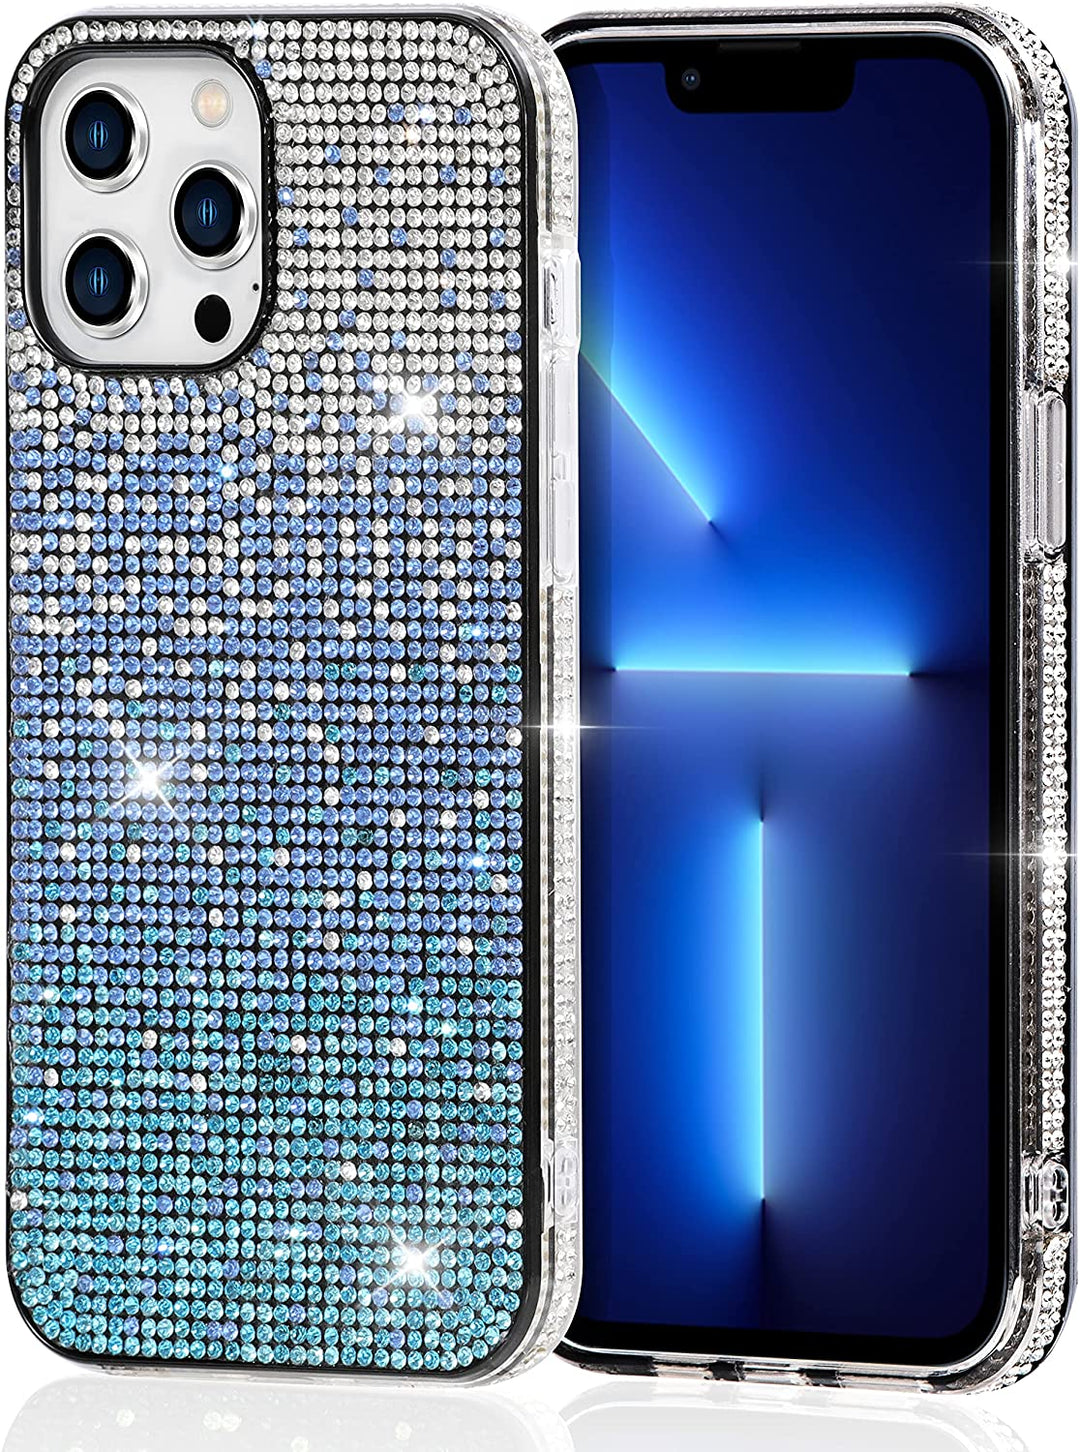 A faux-diamond studded TPU case for the iPhone 12 Pro Max. The case has a color gradient that transitions between blue and white diamonds. #color_blue